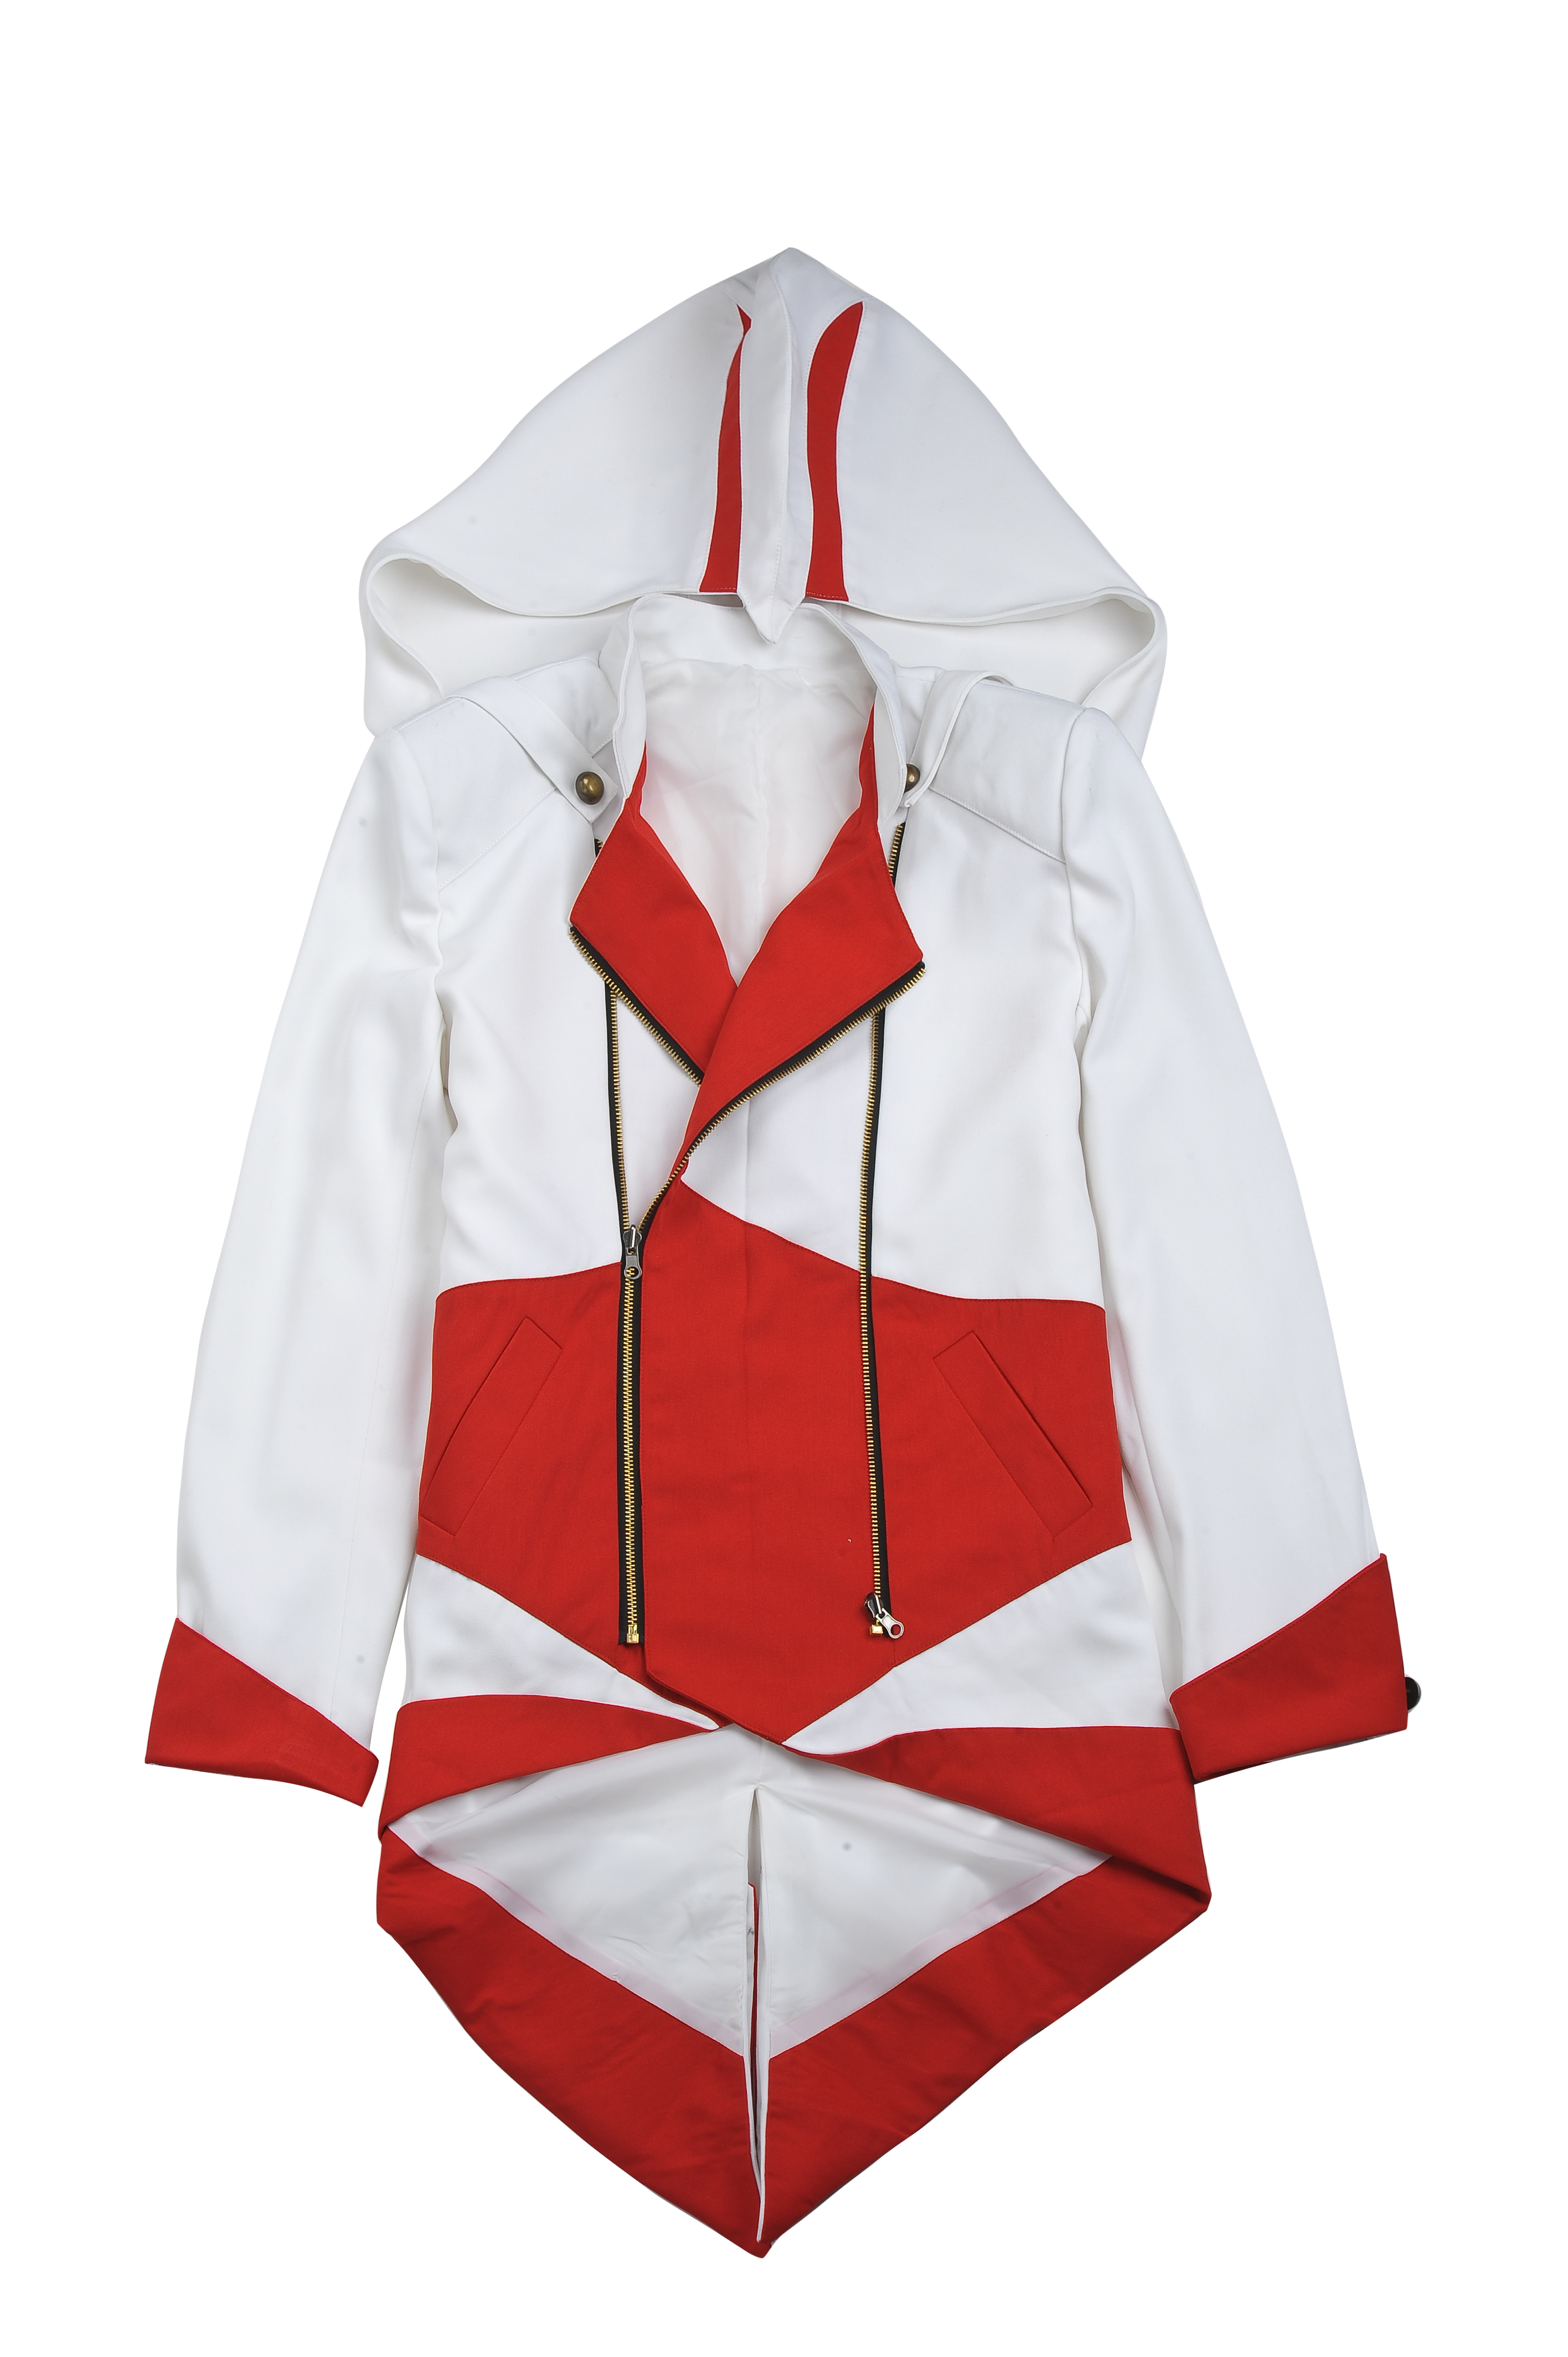 Assassins Creed 3 Connor Kenway Coat Jacket Hoodie White Red - Click Image to Close